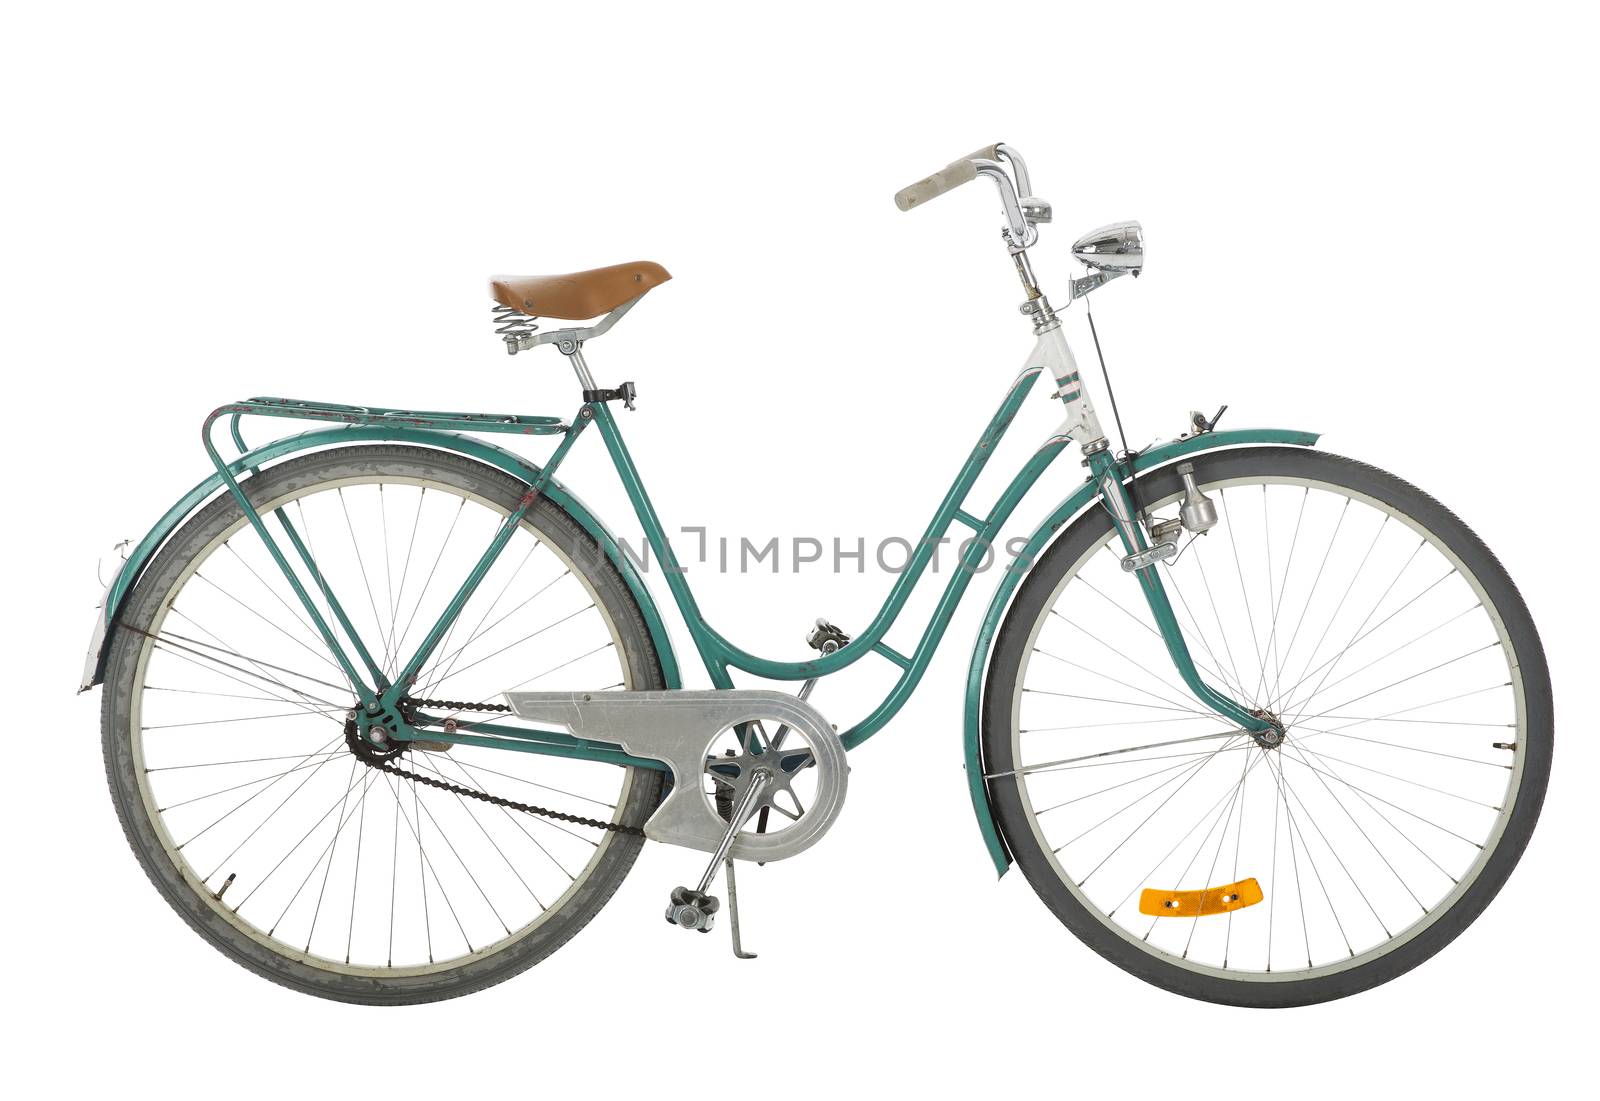 Old fashioned bicycle by gemenacom